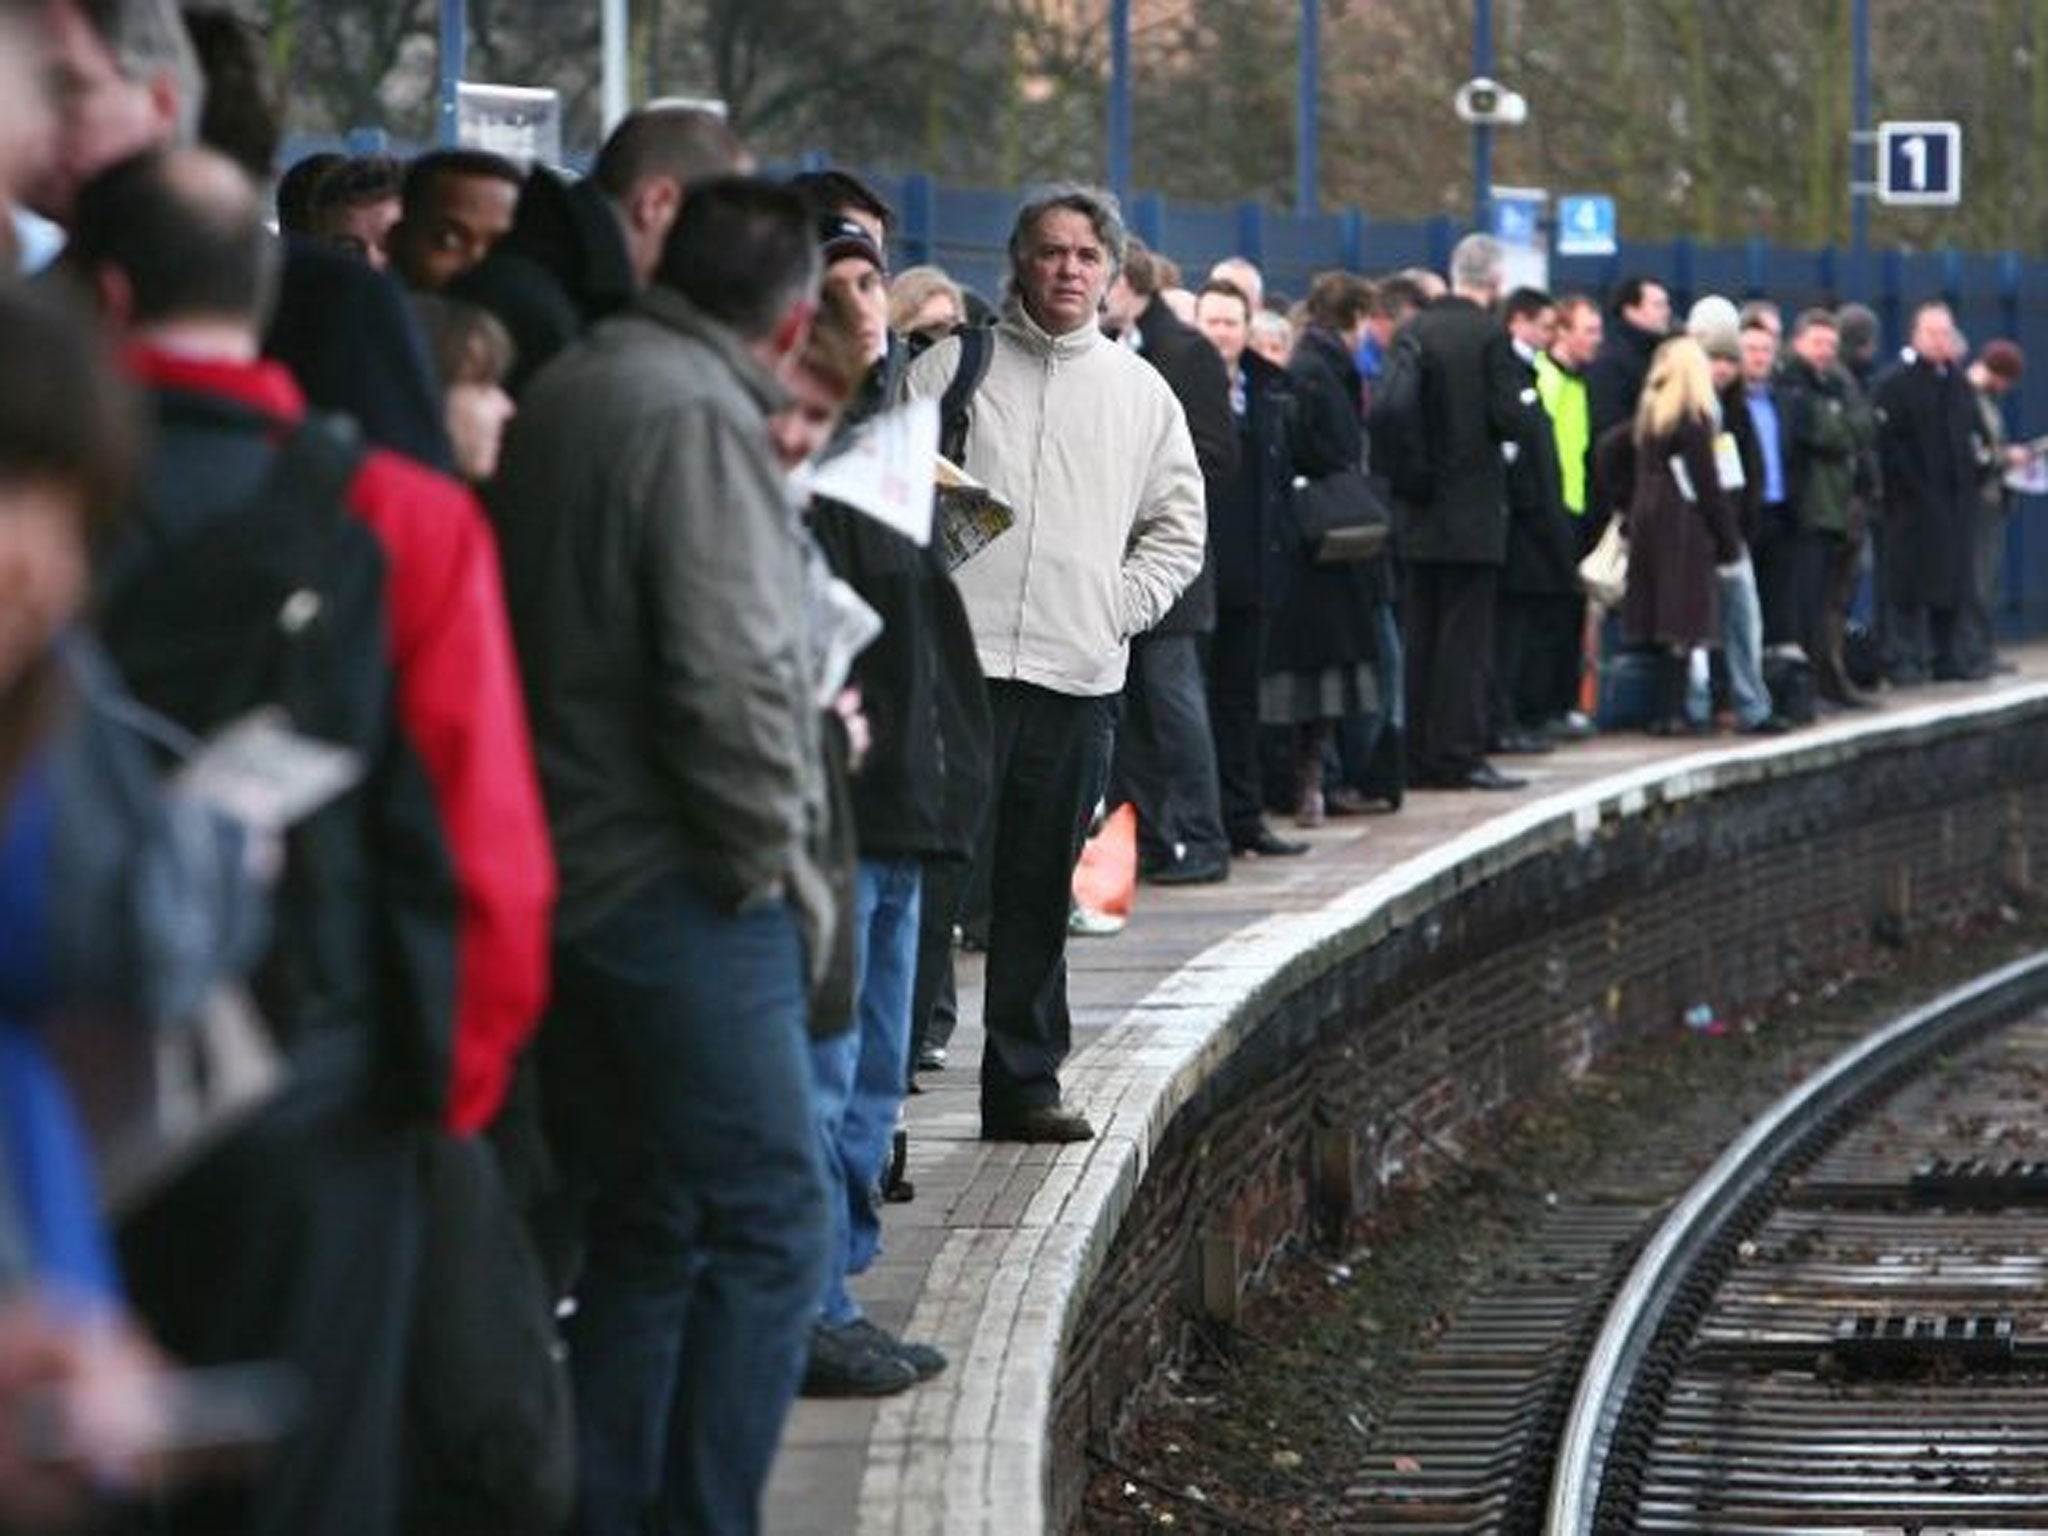 Commuters wait on a platform. Passenger satisfaction levels have dipped below 50% for the majority of train companies, according to a Which? survey of more than 7,000 regular travellers.